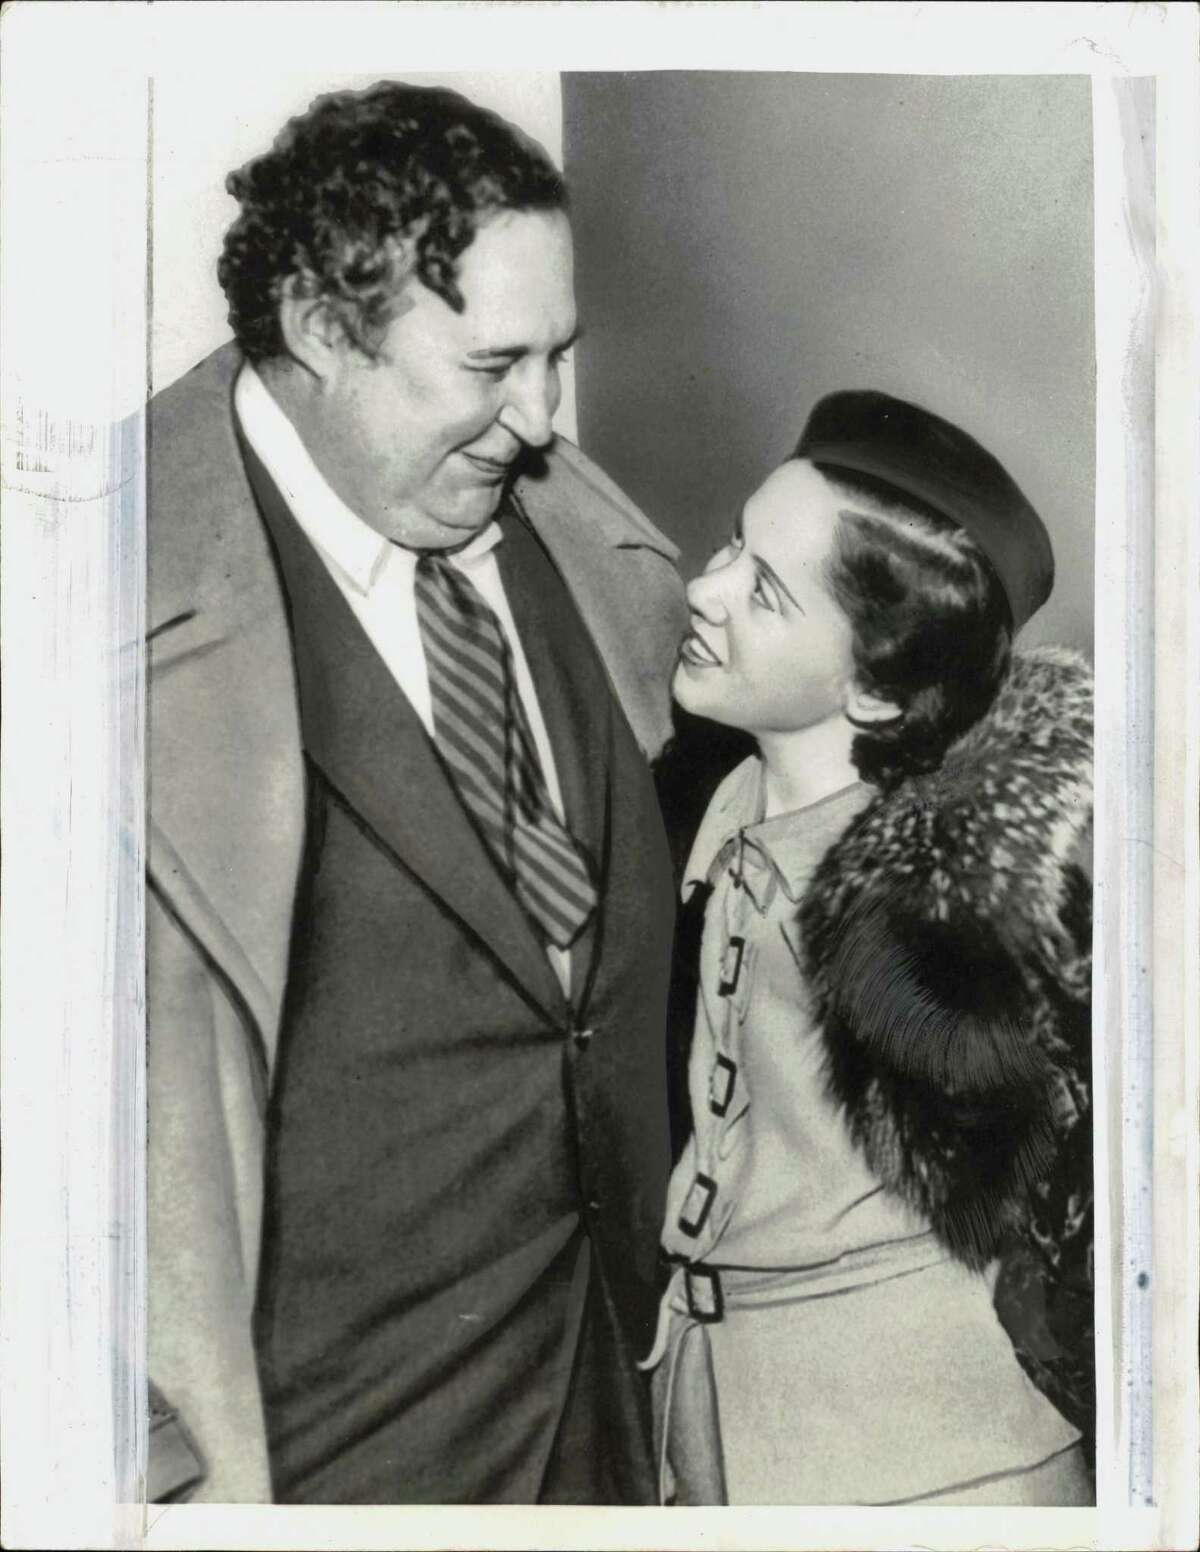 Heywood Broun, left, with his second wife.